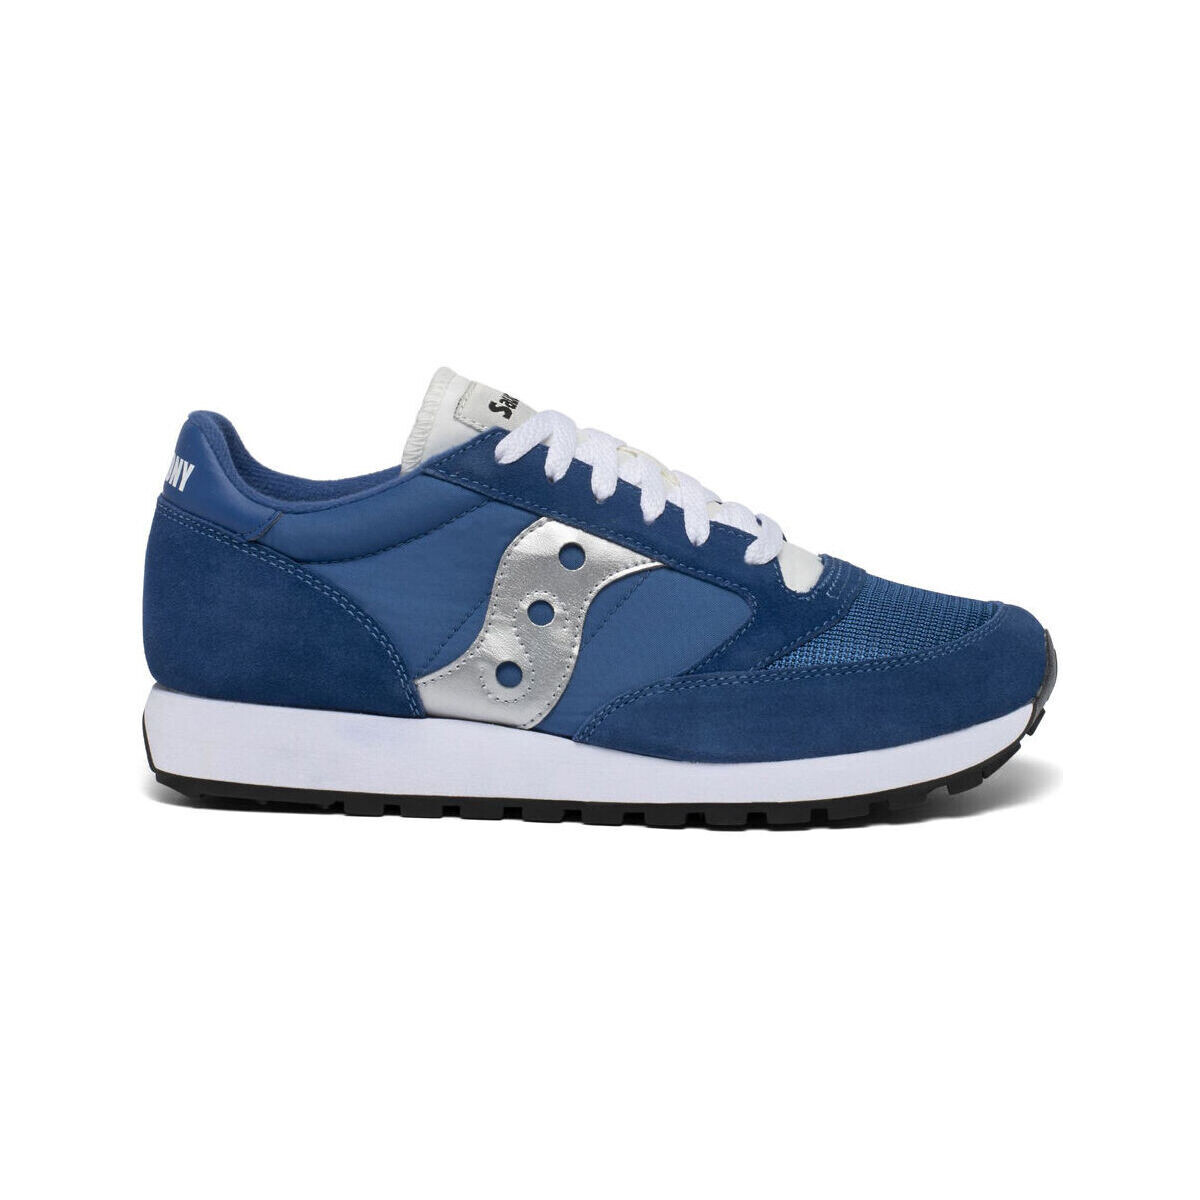 Chaussures Homme Saucony zapatillas saucony peregrine 12 mujer 38.5 6275 basin gold Jazz original vintage S70368 146 Blue/White/Silver Blanc